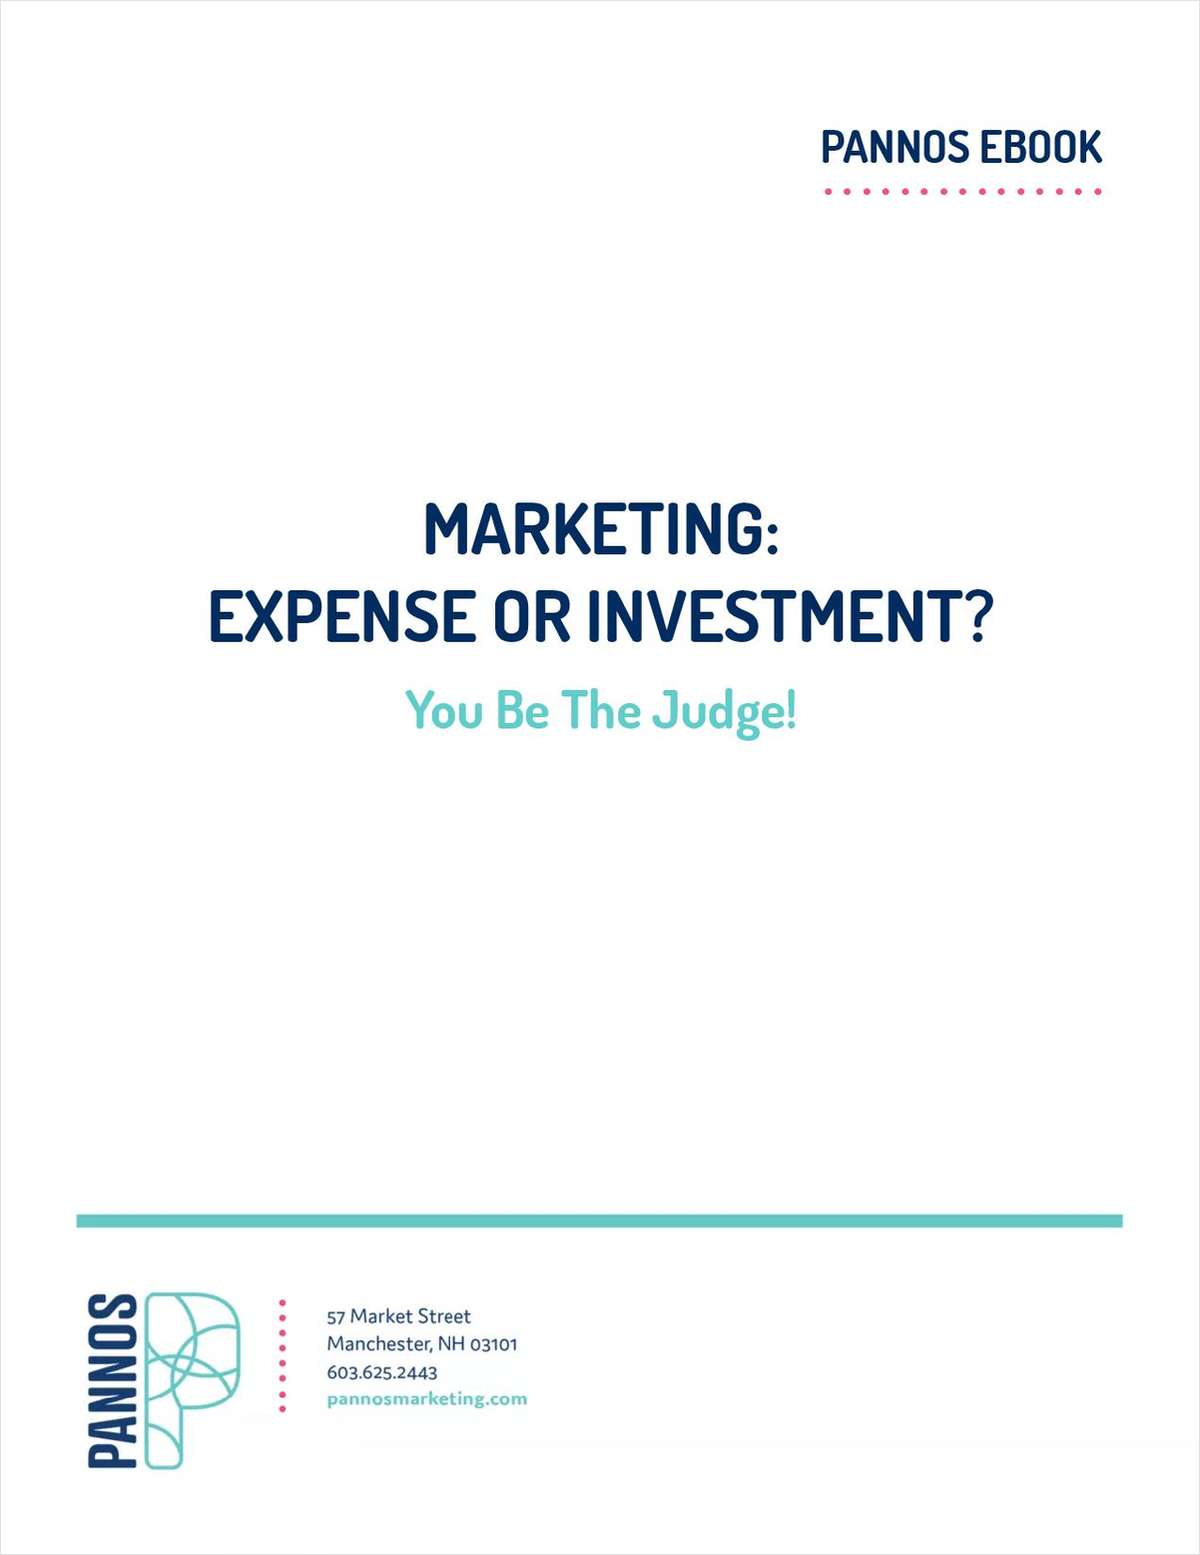 Marketing Expense or Investment?